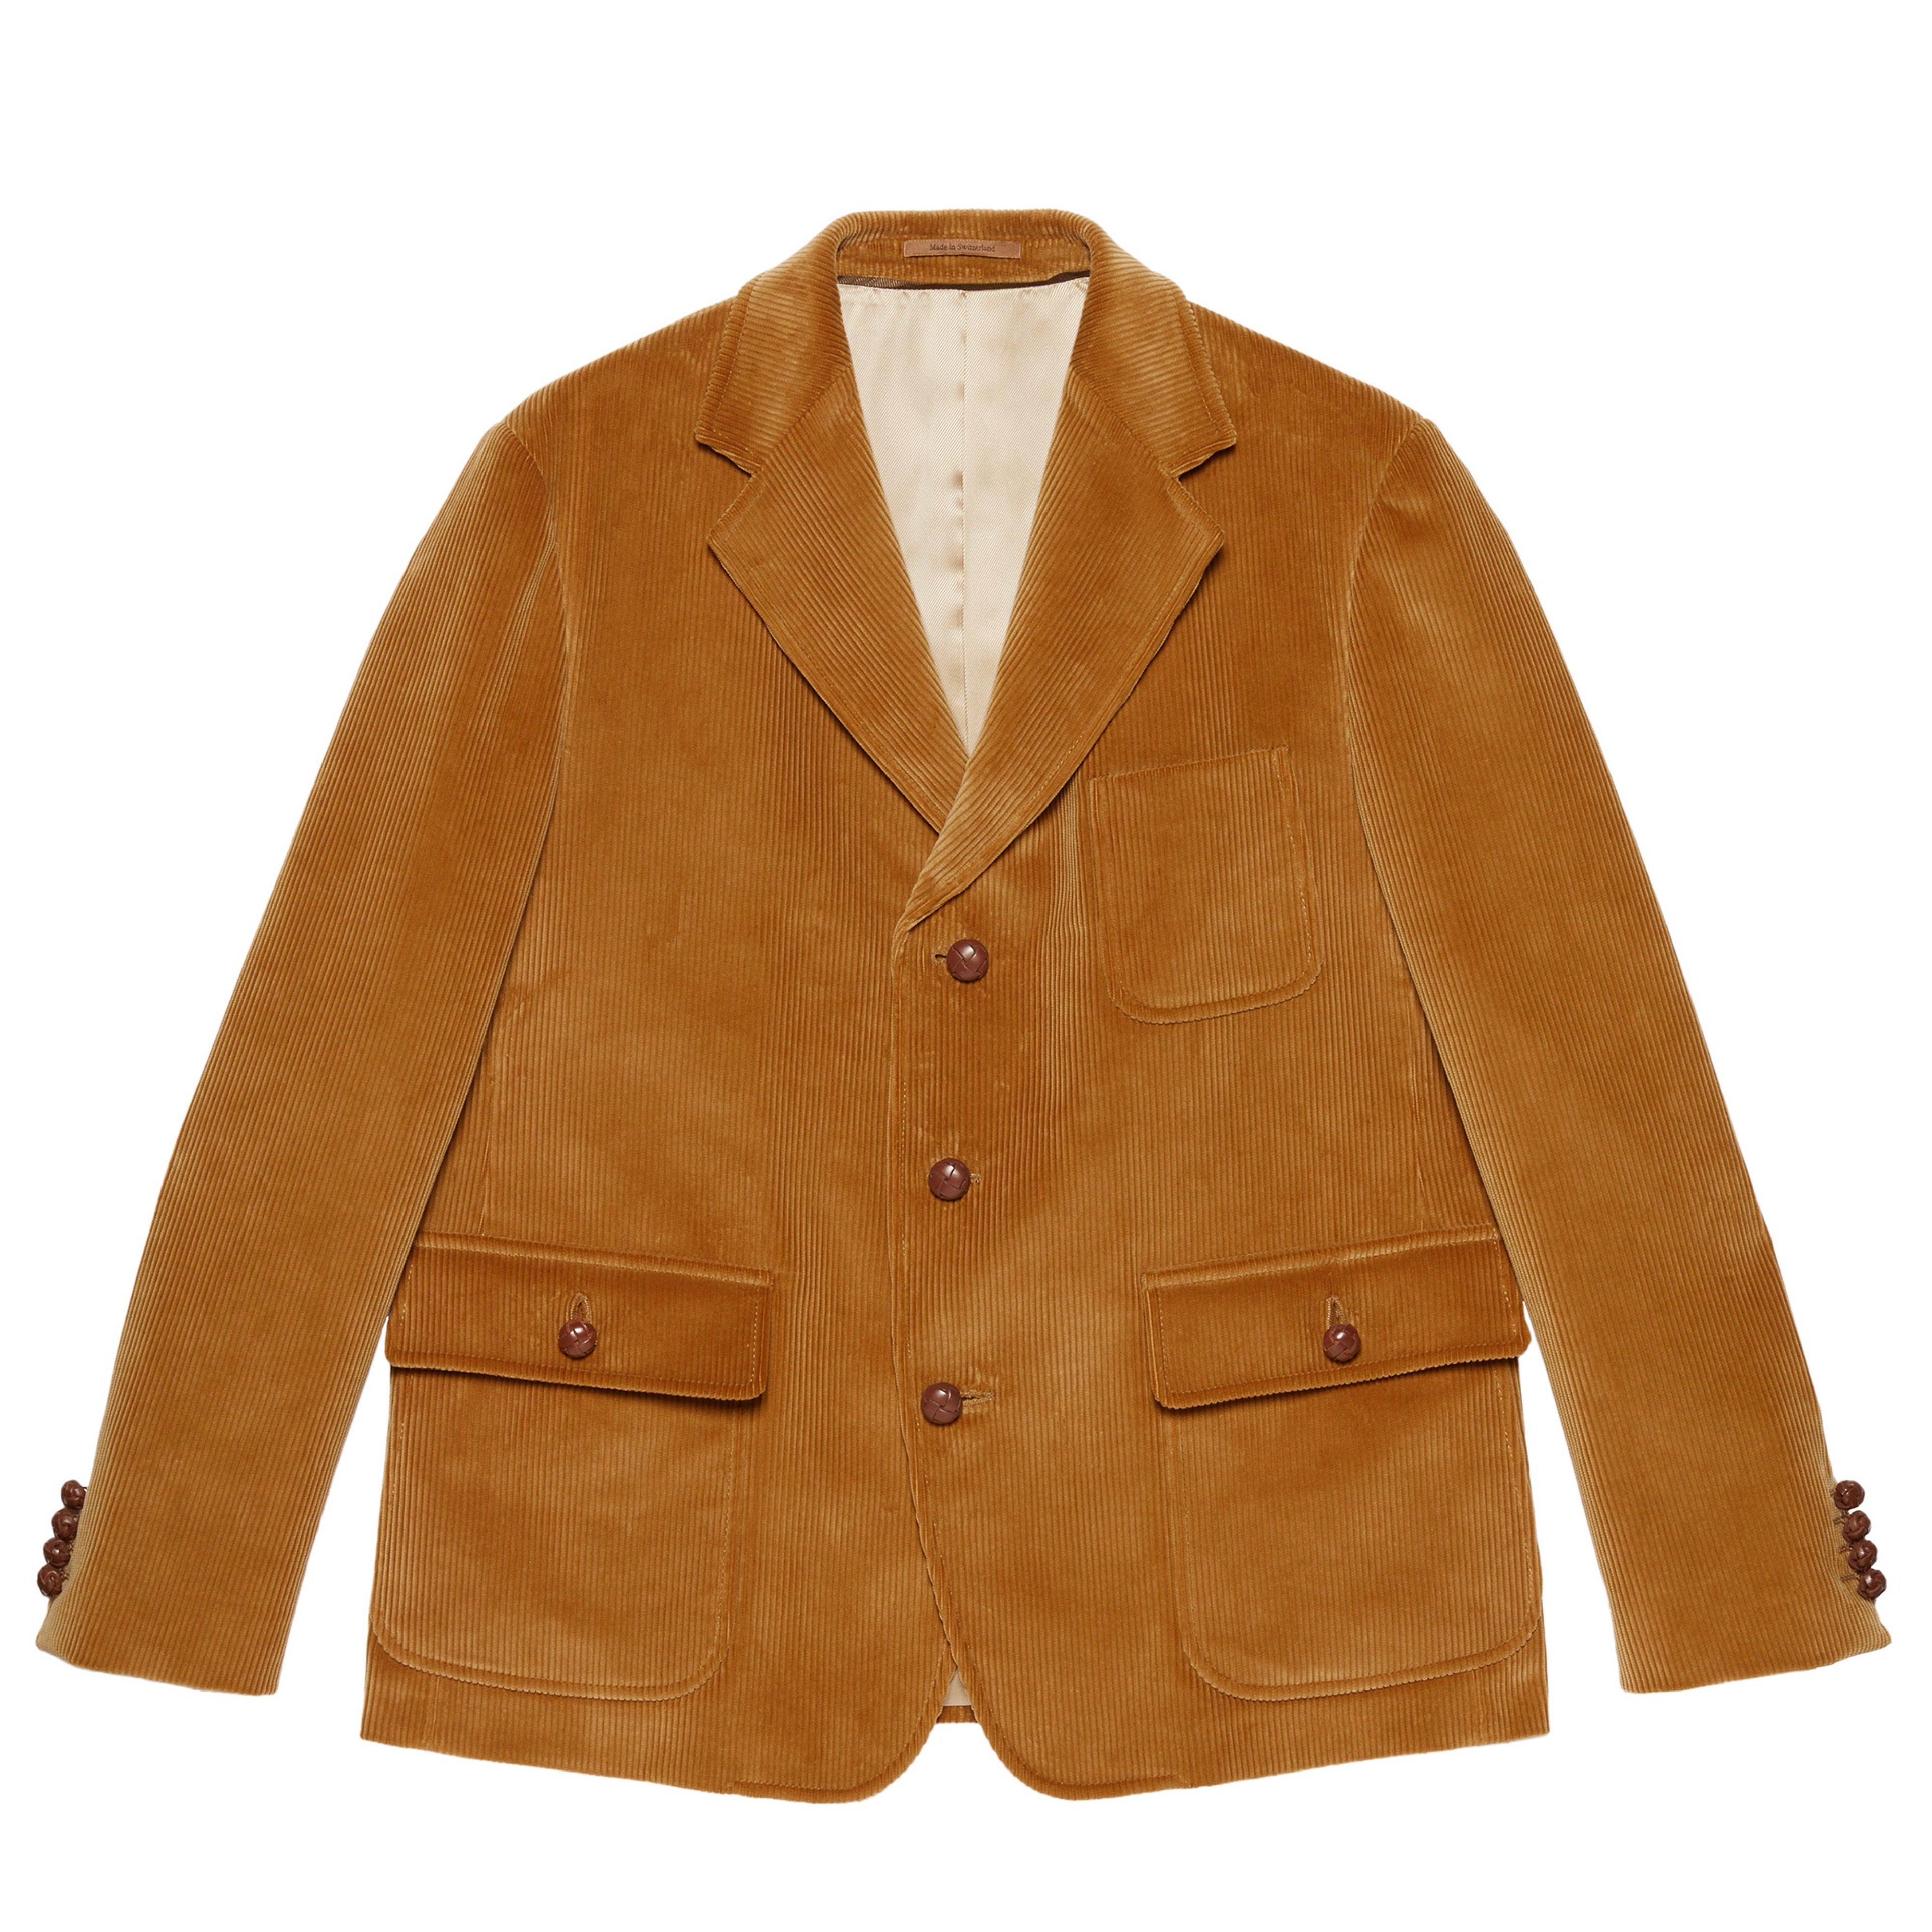 Gucci - Men’s DSM Exclusive Corduroy Single-Breasted Jacket - (Camel) by GUCCI